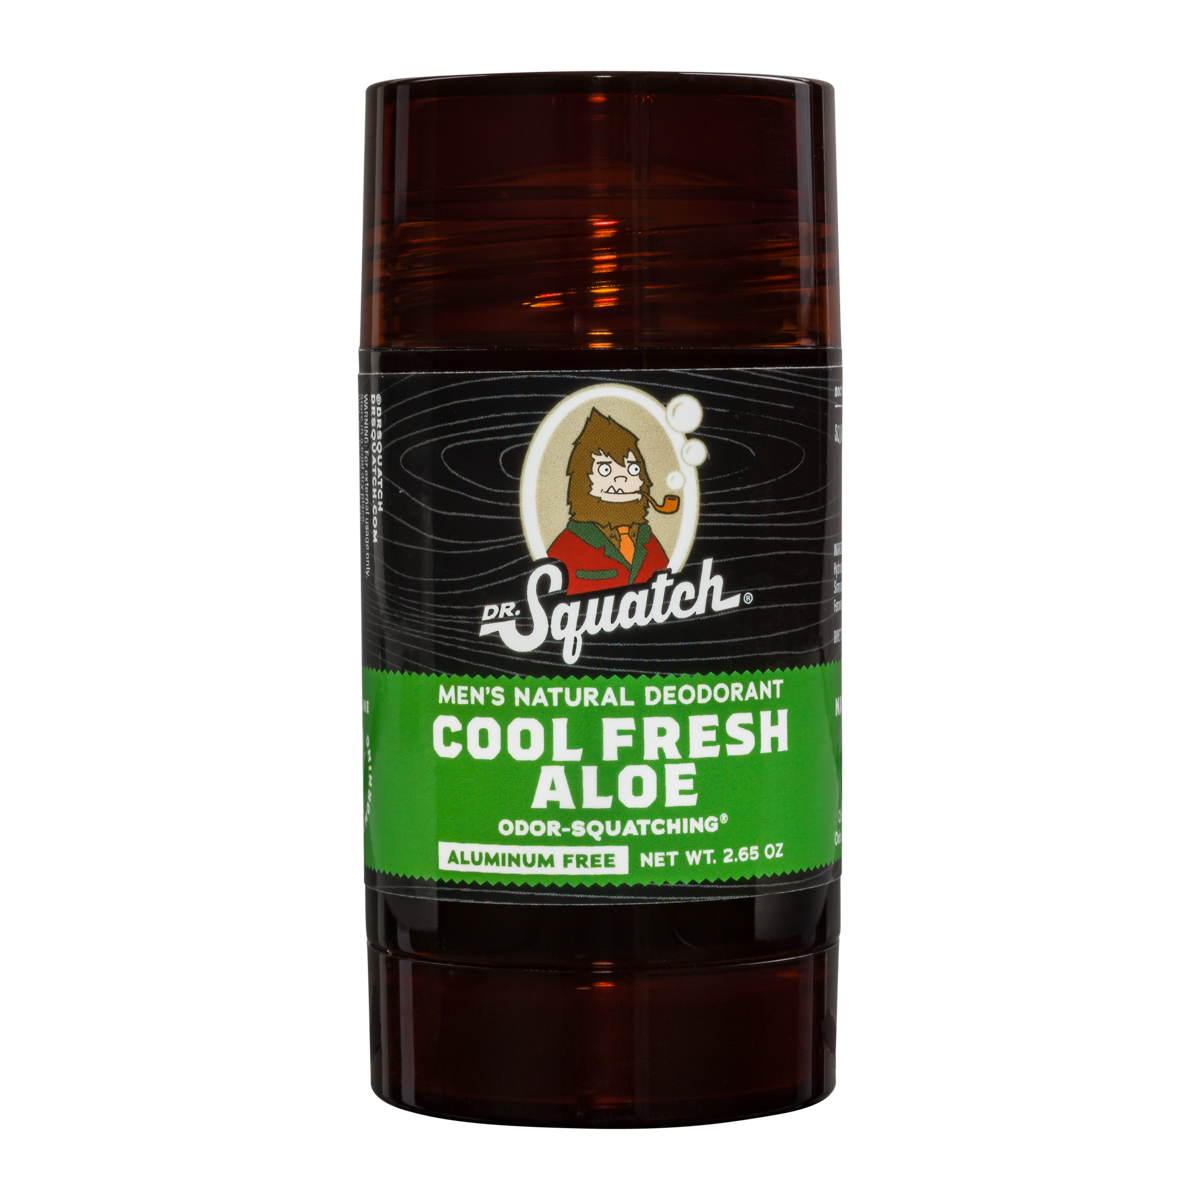 https://cdn.shopify.com/s/files/1/0275/7784/3817/products/DrSquatch_coolfreshdeo_0001.png?v=1647539295